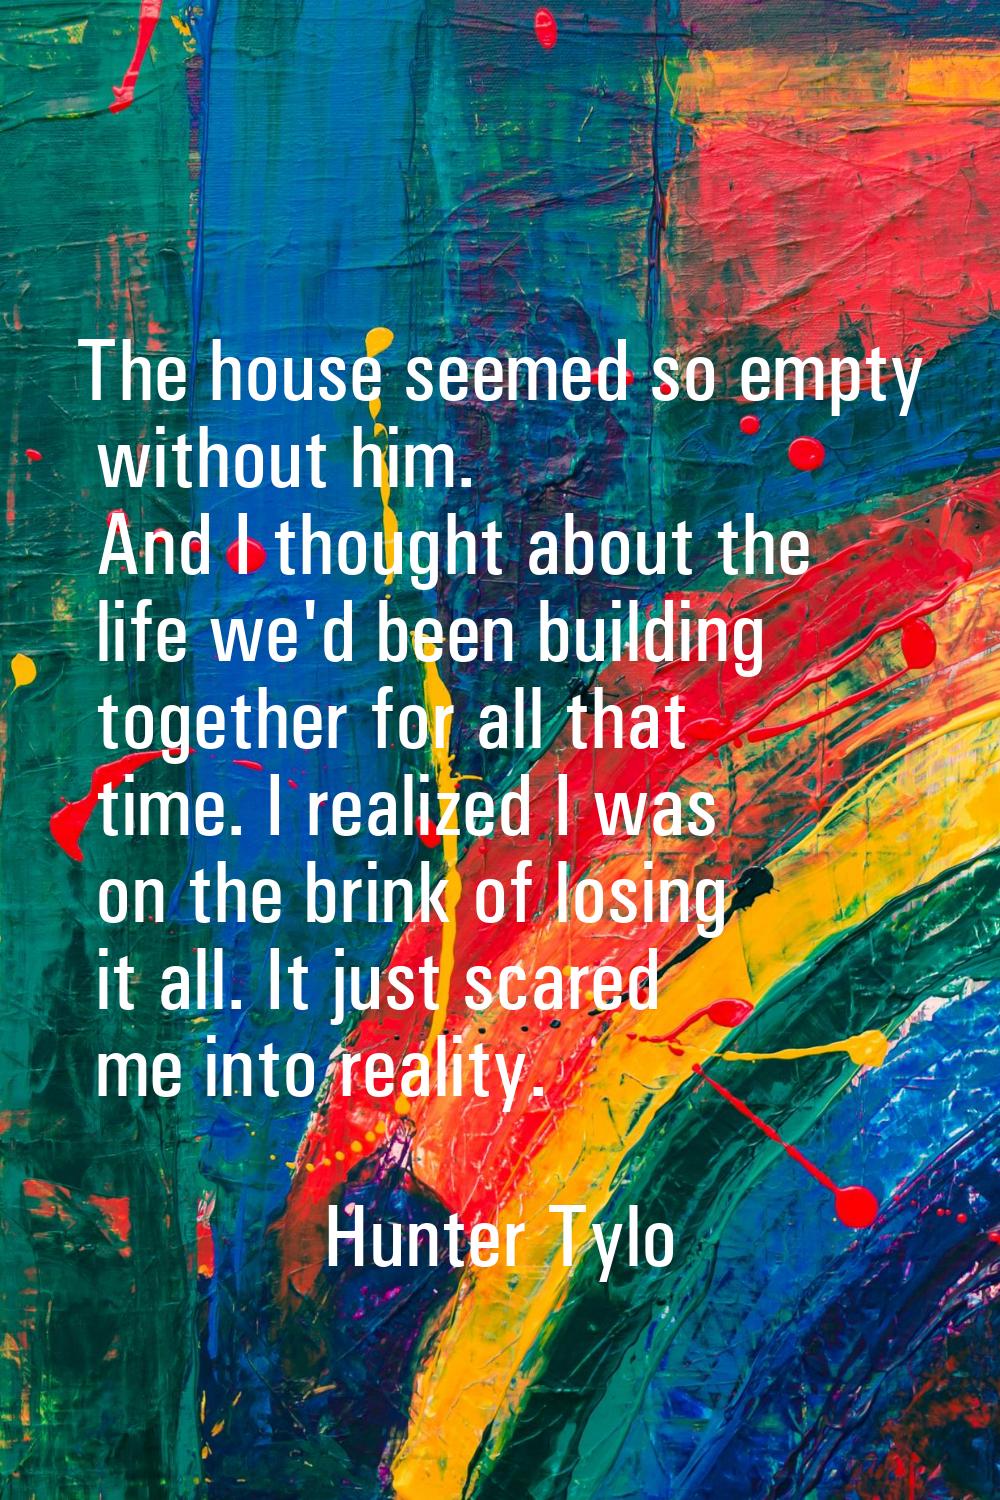 The house seemed so empty without him. And I thought about the life we'd been building together for